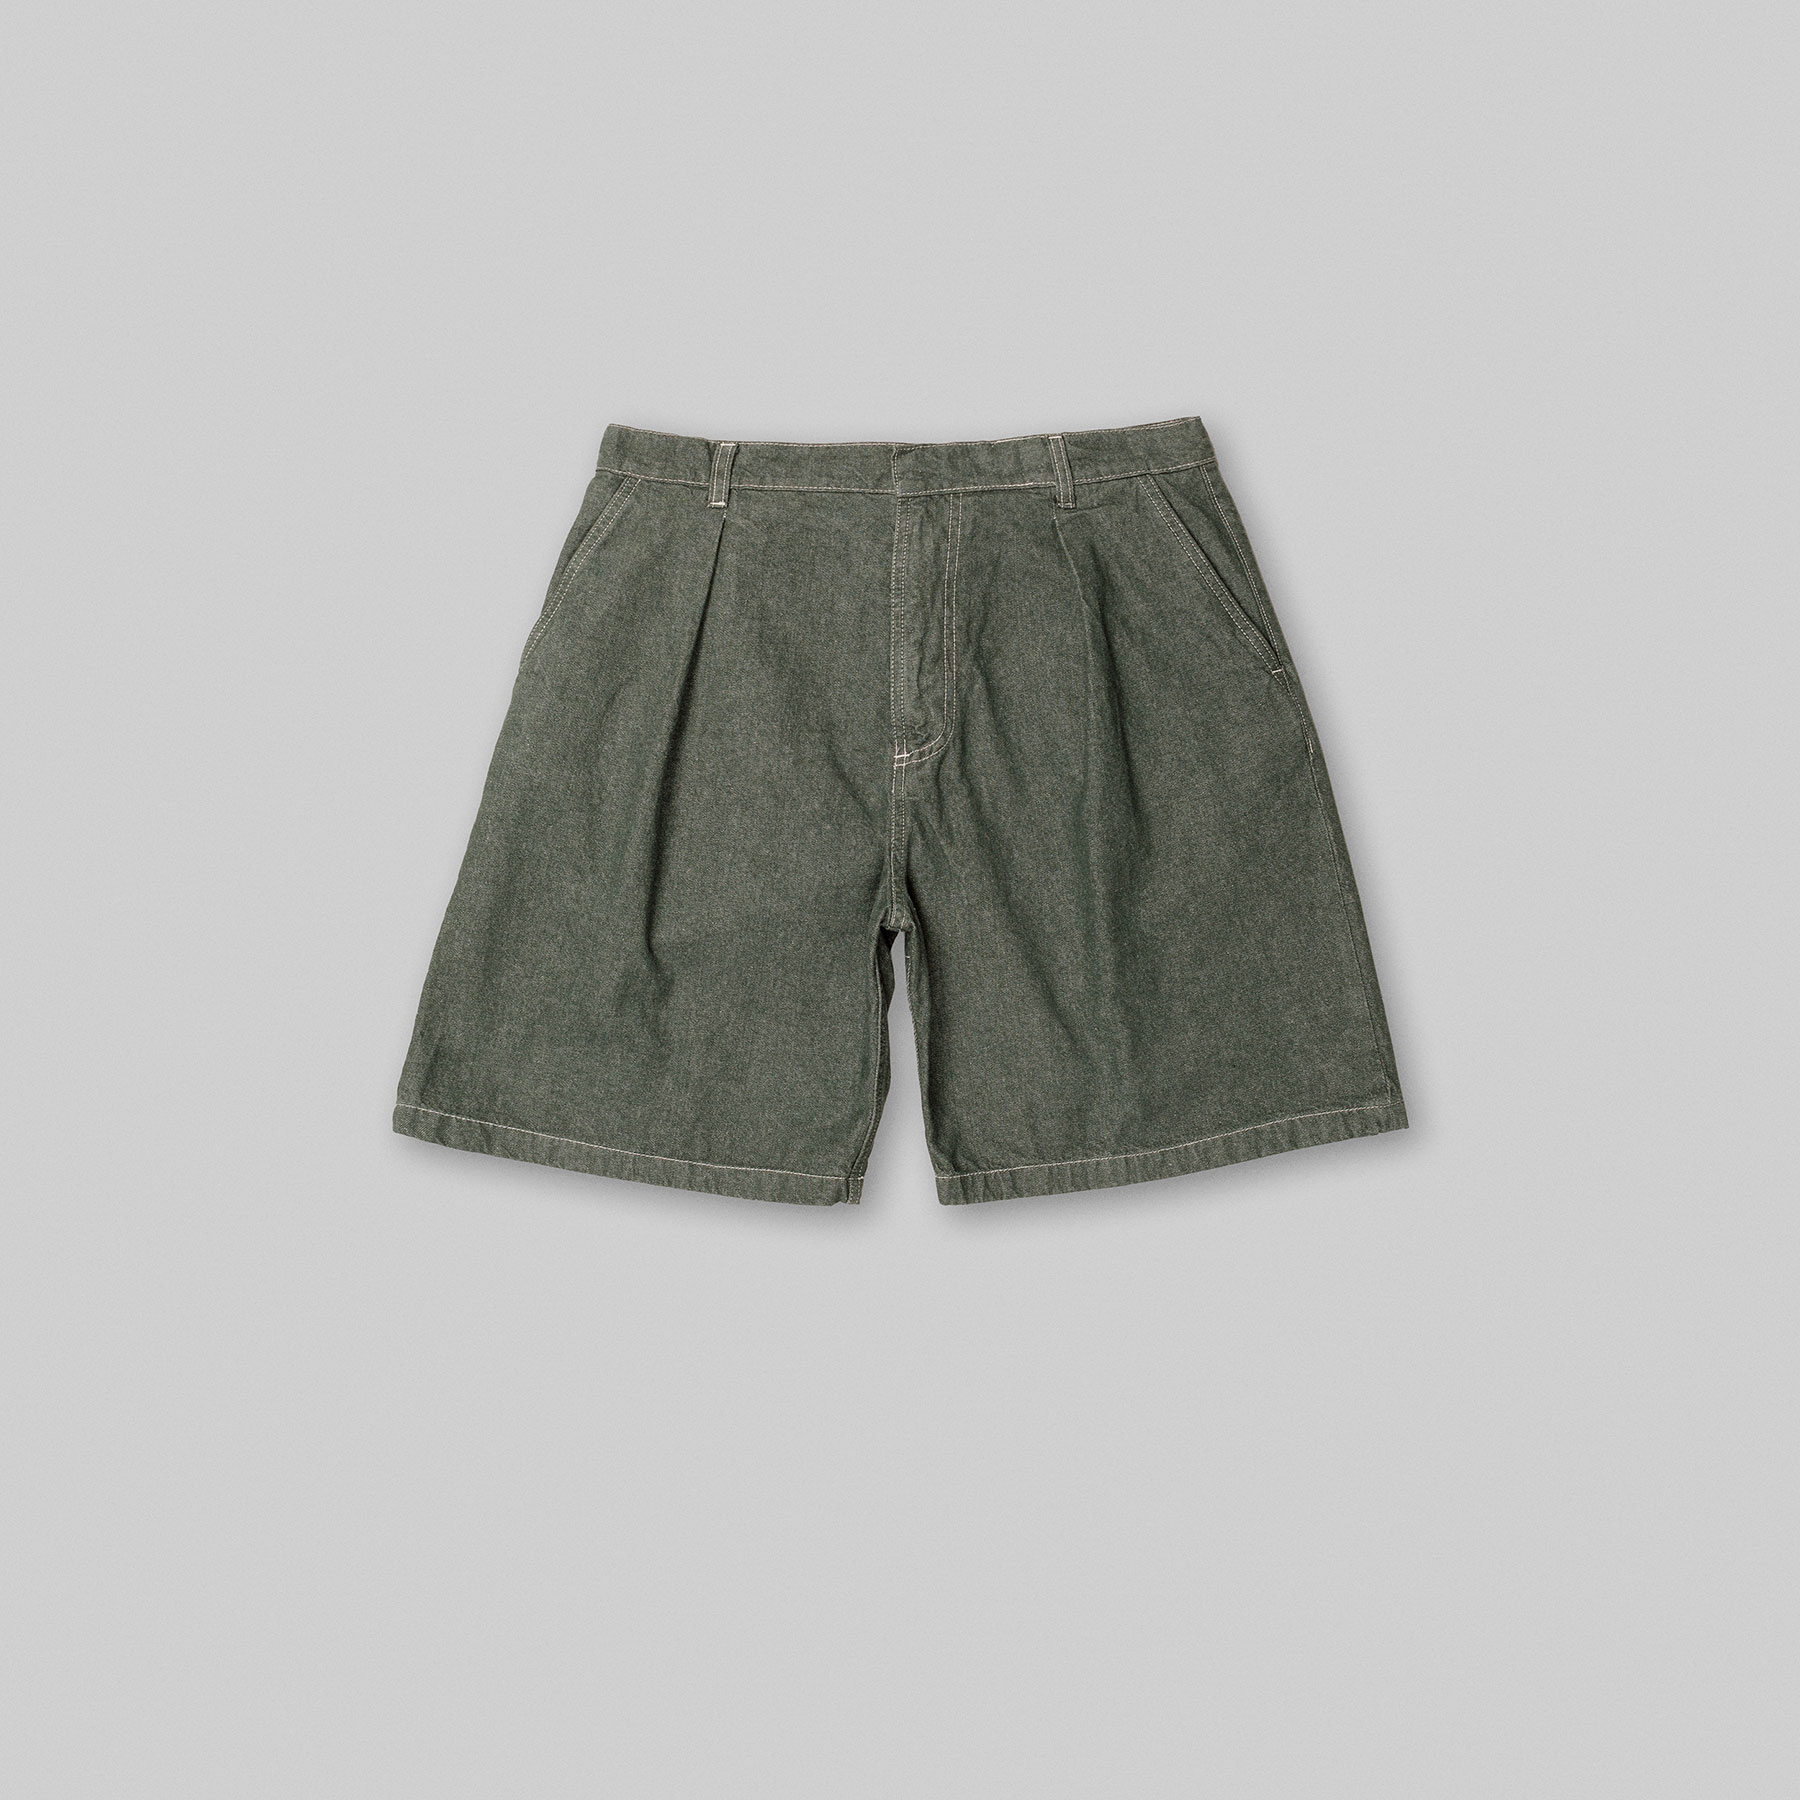 PAGE shorts by Arpenteur in Green color